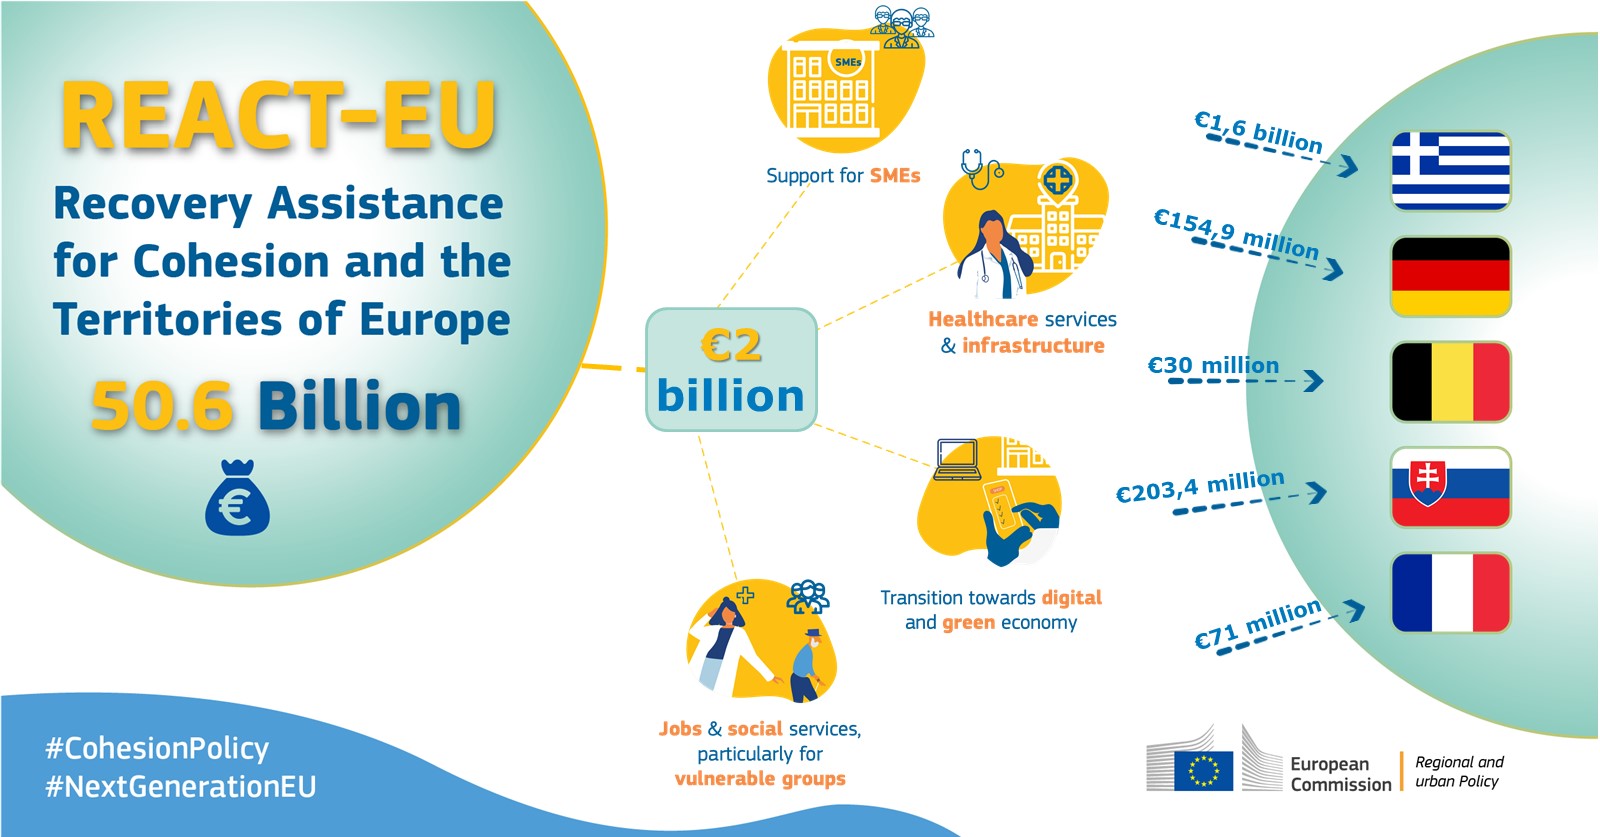 REACT-EU: more than €2 billion in additional cohesion funds –  €1.6 billion for Greece